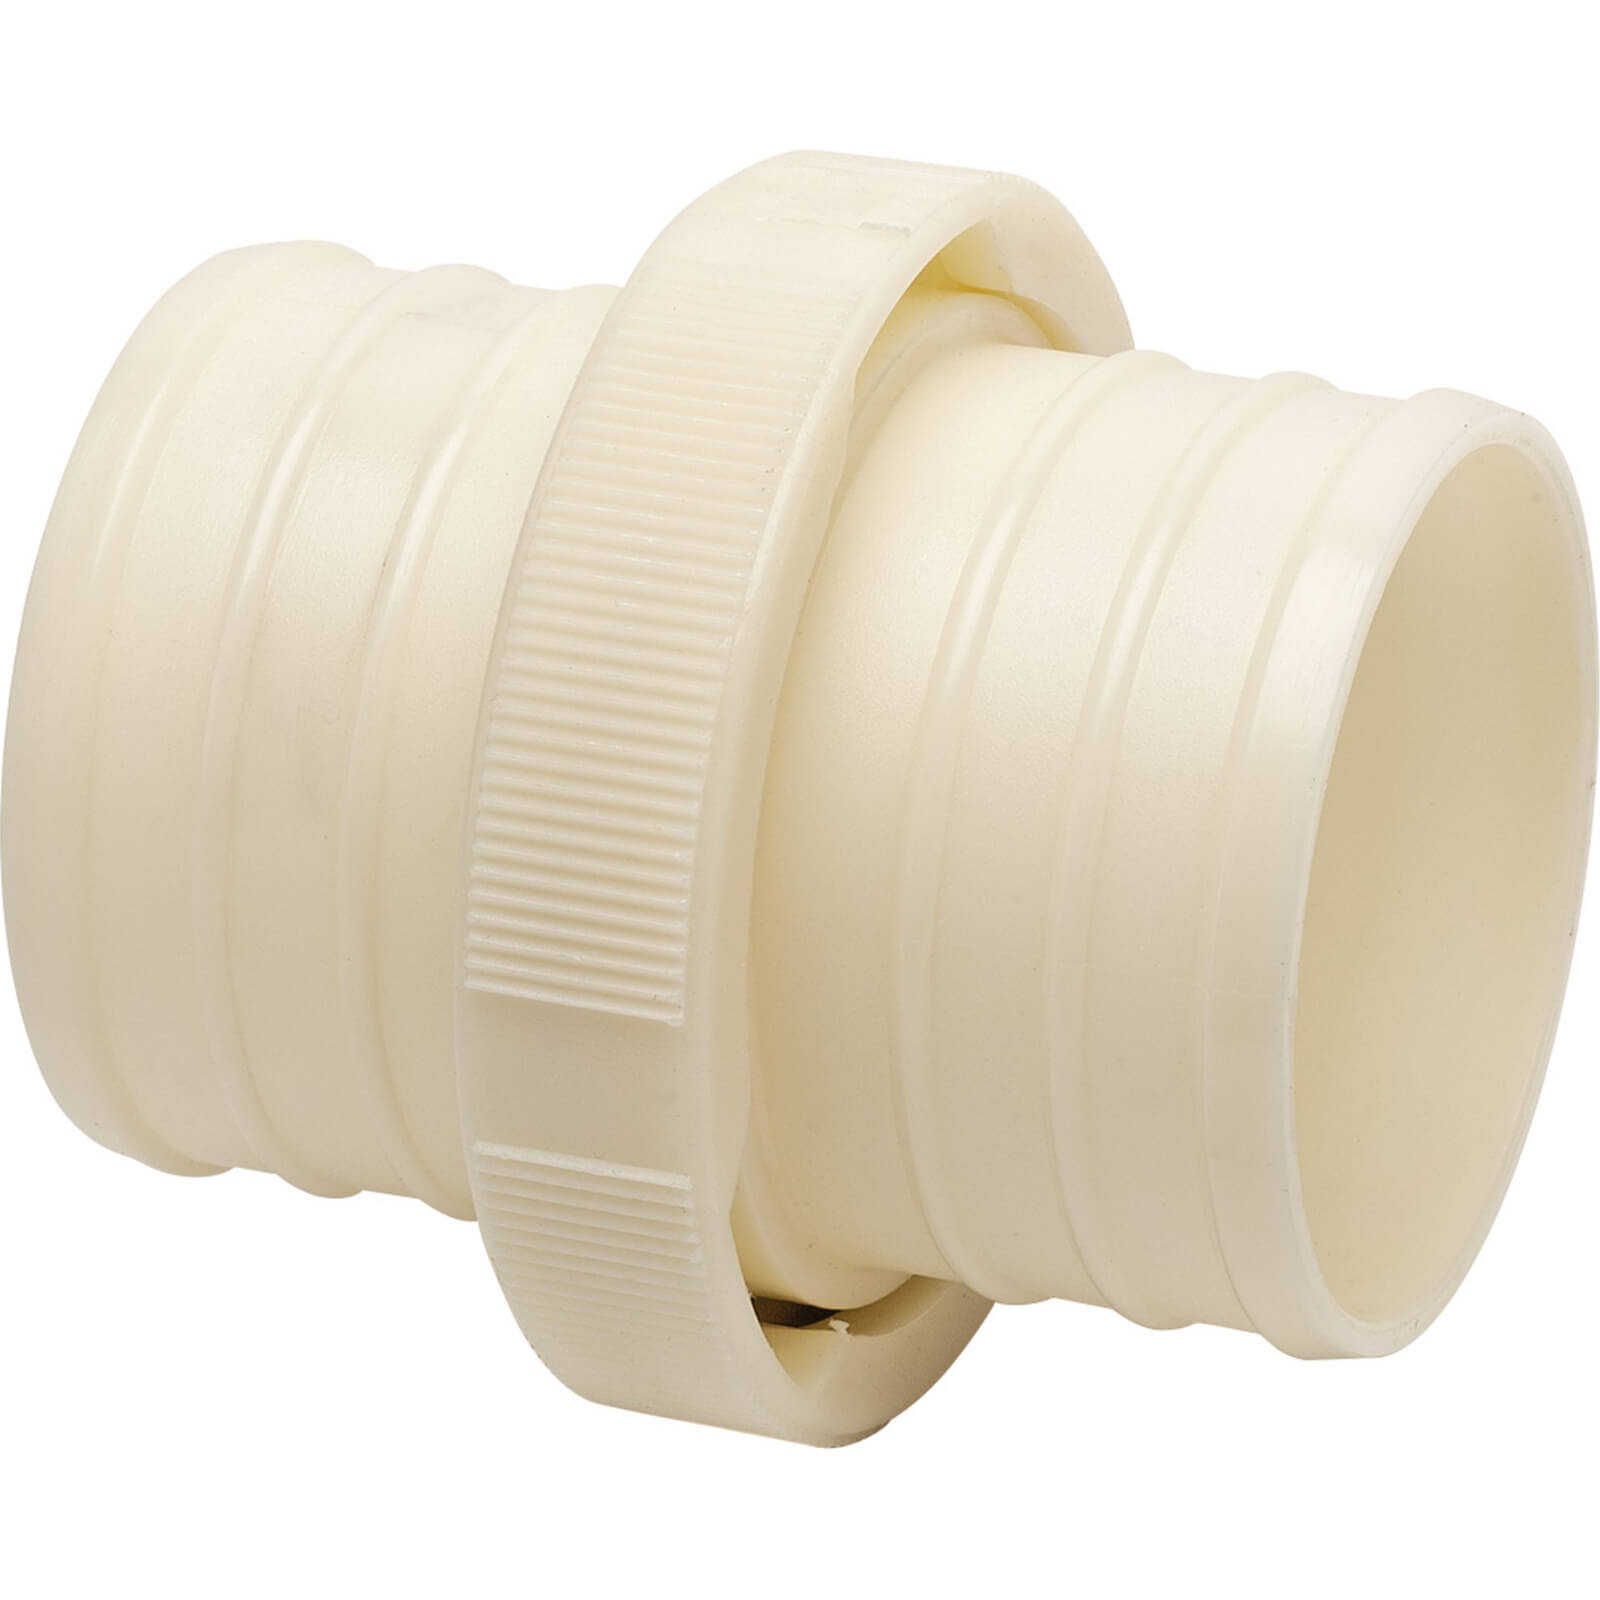 Image of Draper Lay Flat Hose Coupling Adaptor or Connector 3" / 75mm